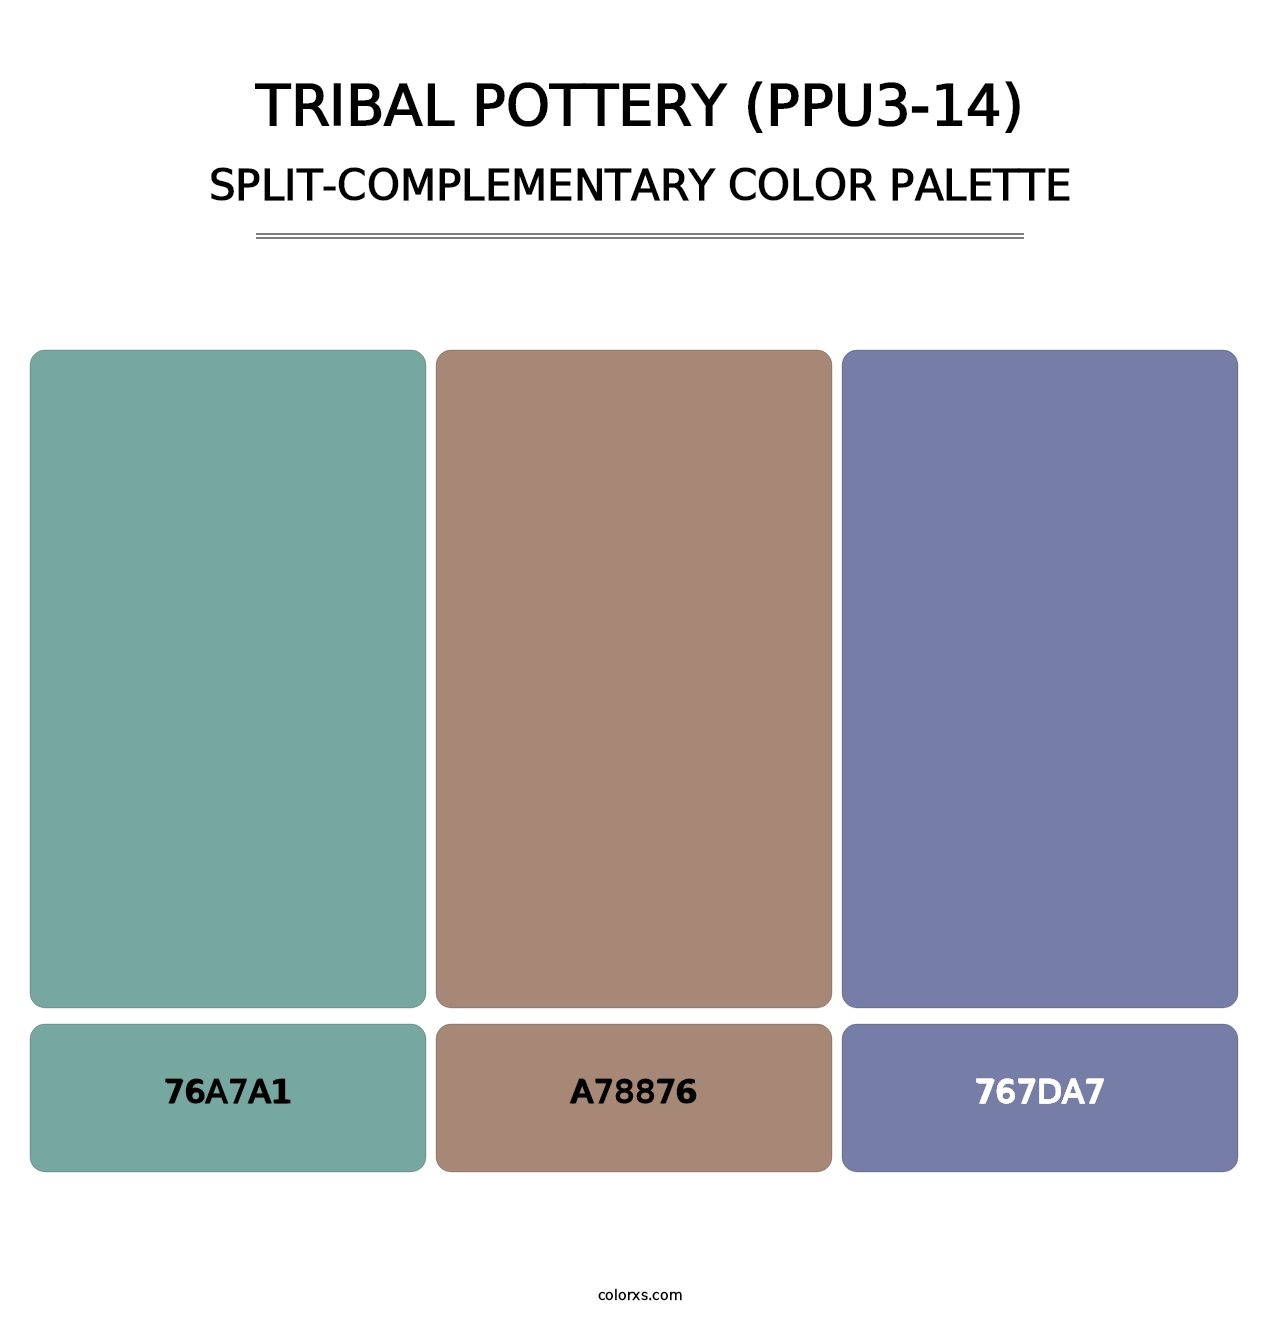 Tribal Pottery (PPU3-14) - Split-Complementary Color Palette